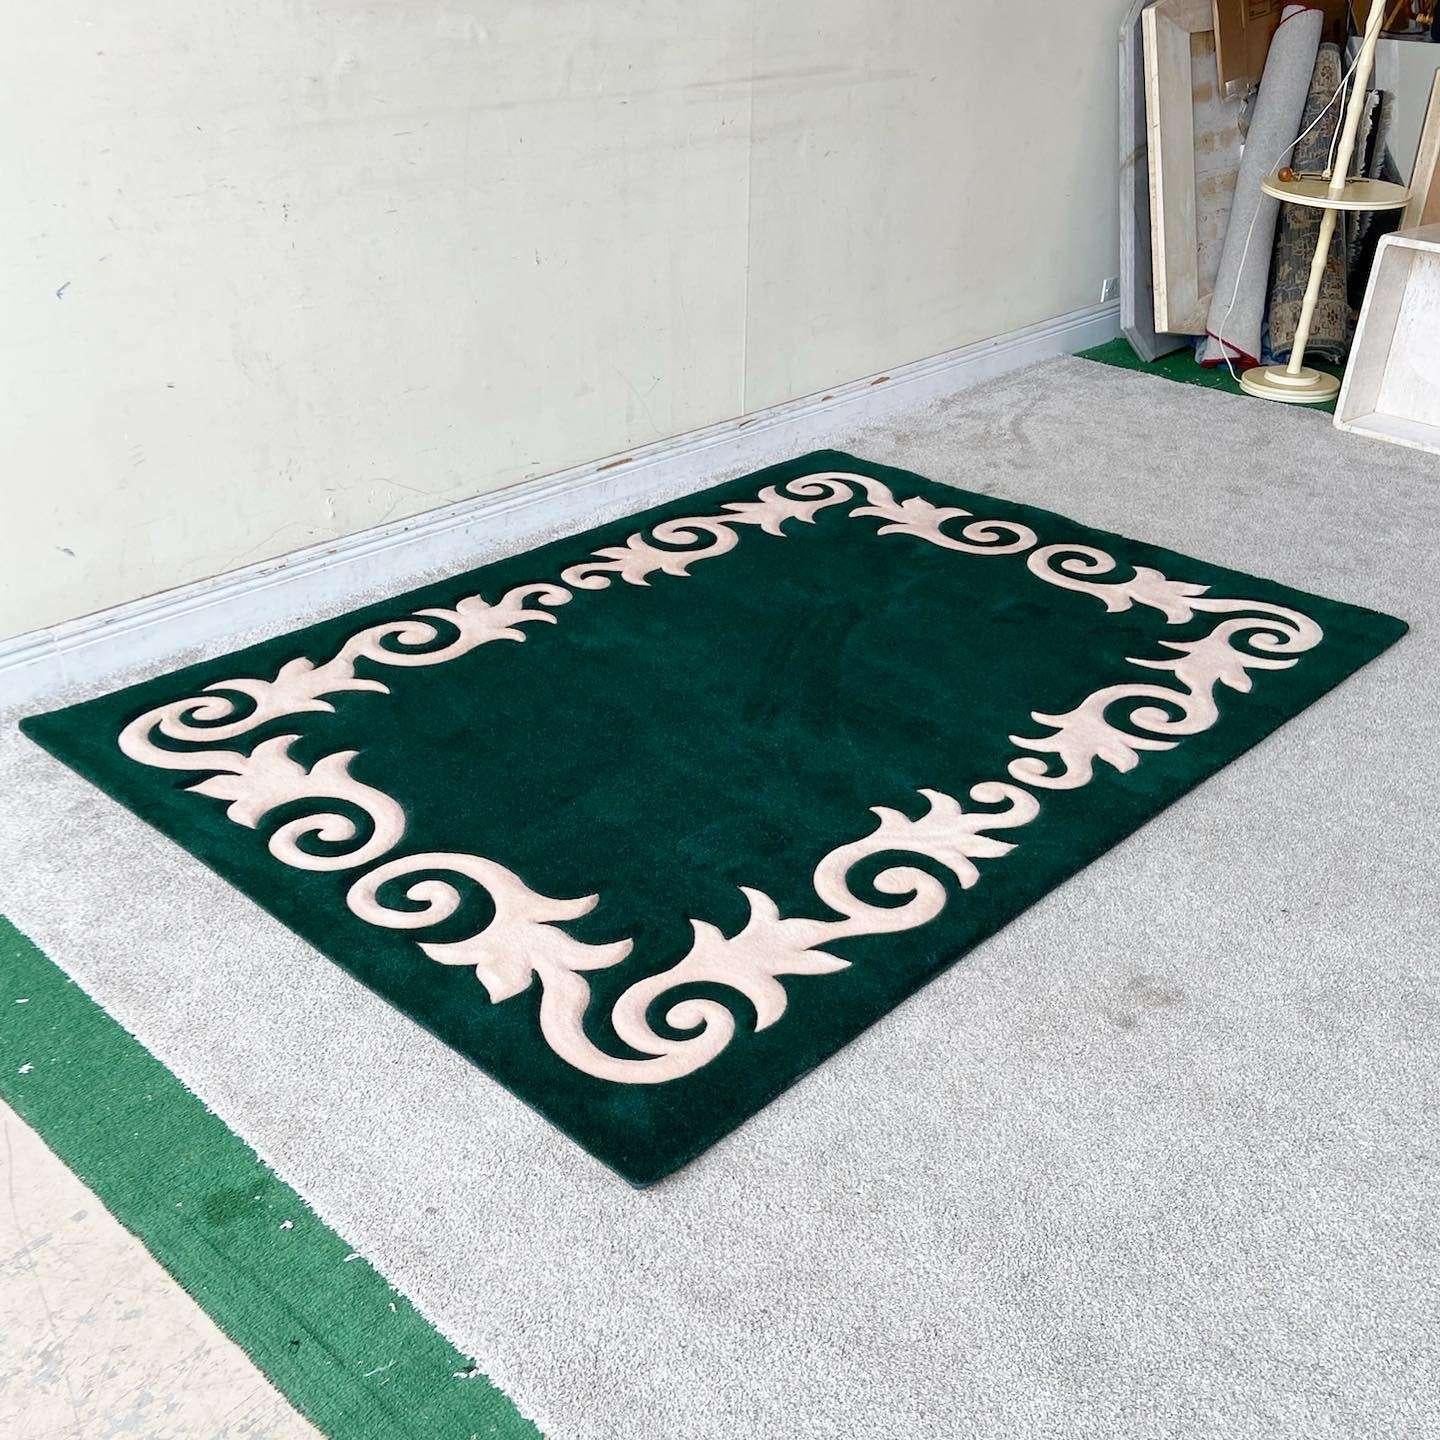 Exceptional vintage postmodern rectangular area rug. Features a Dark green with the outer trim bordered by a light pink vining the edge of the rug.

Rug 7
